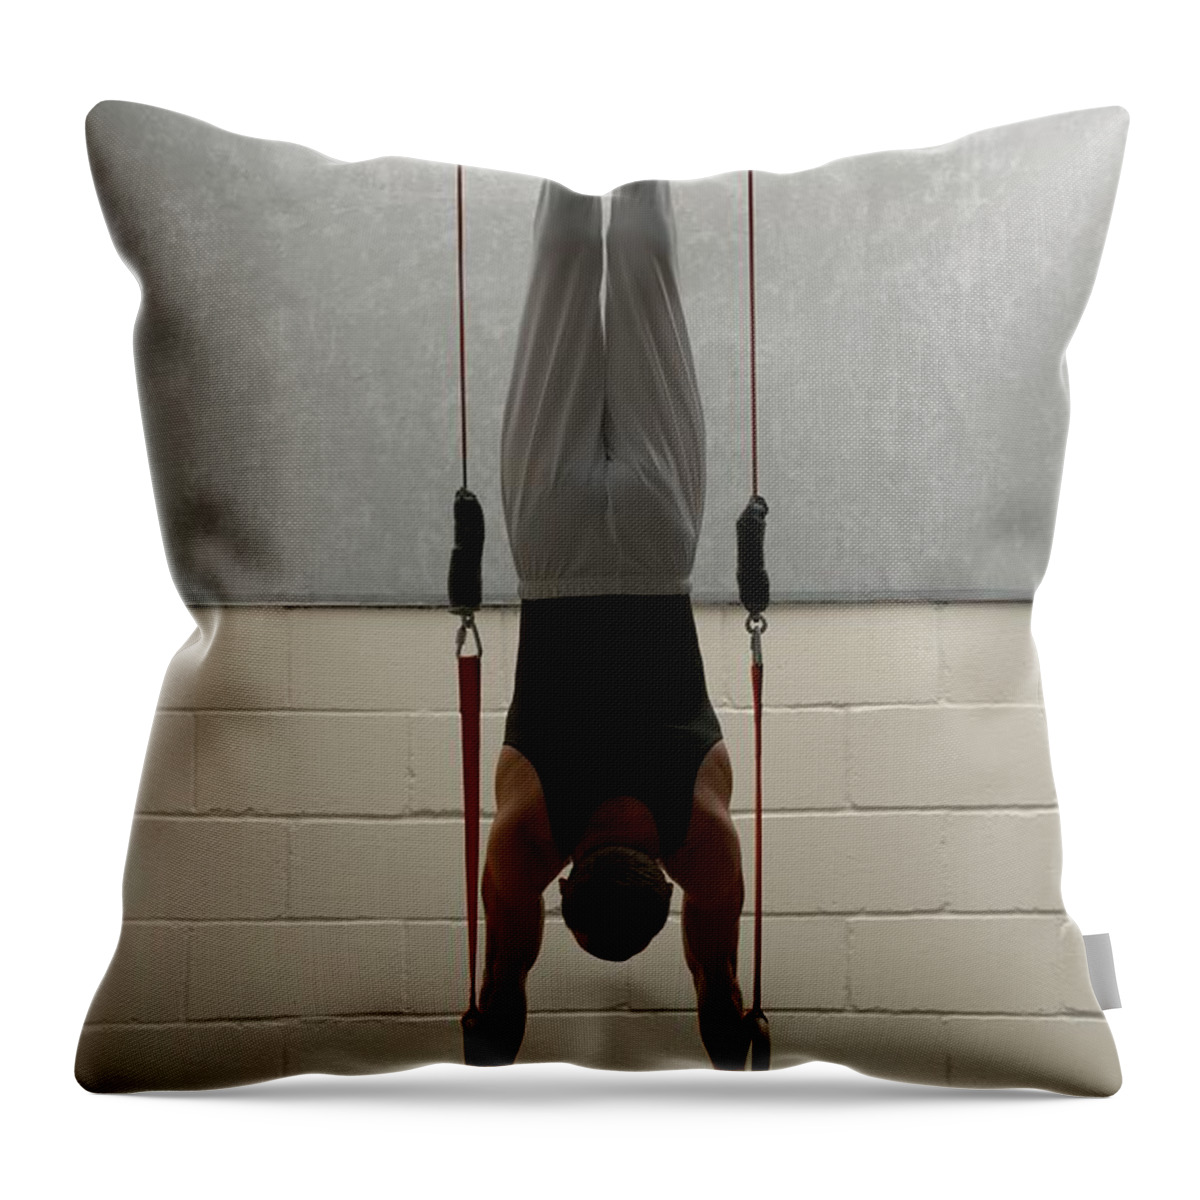 Hanging Throw Pillow featuring the photograph Male Gymnast Balancing Upside Down On by Romilly Lockyer